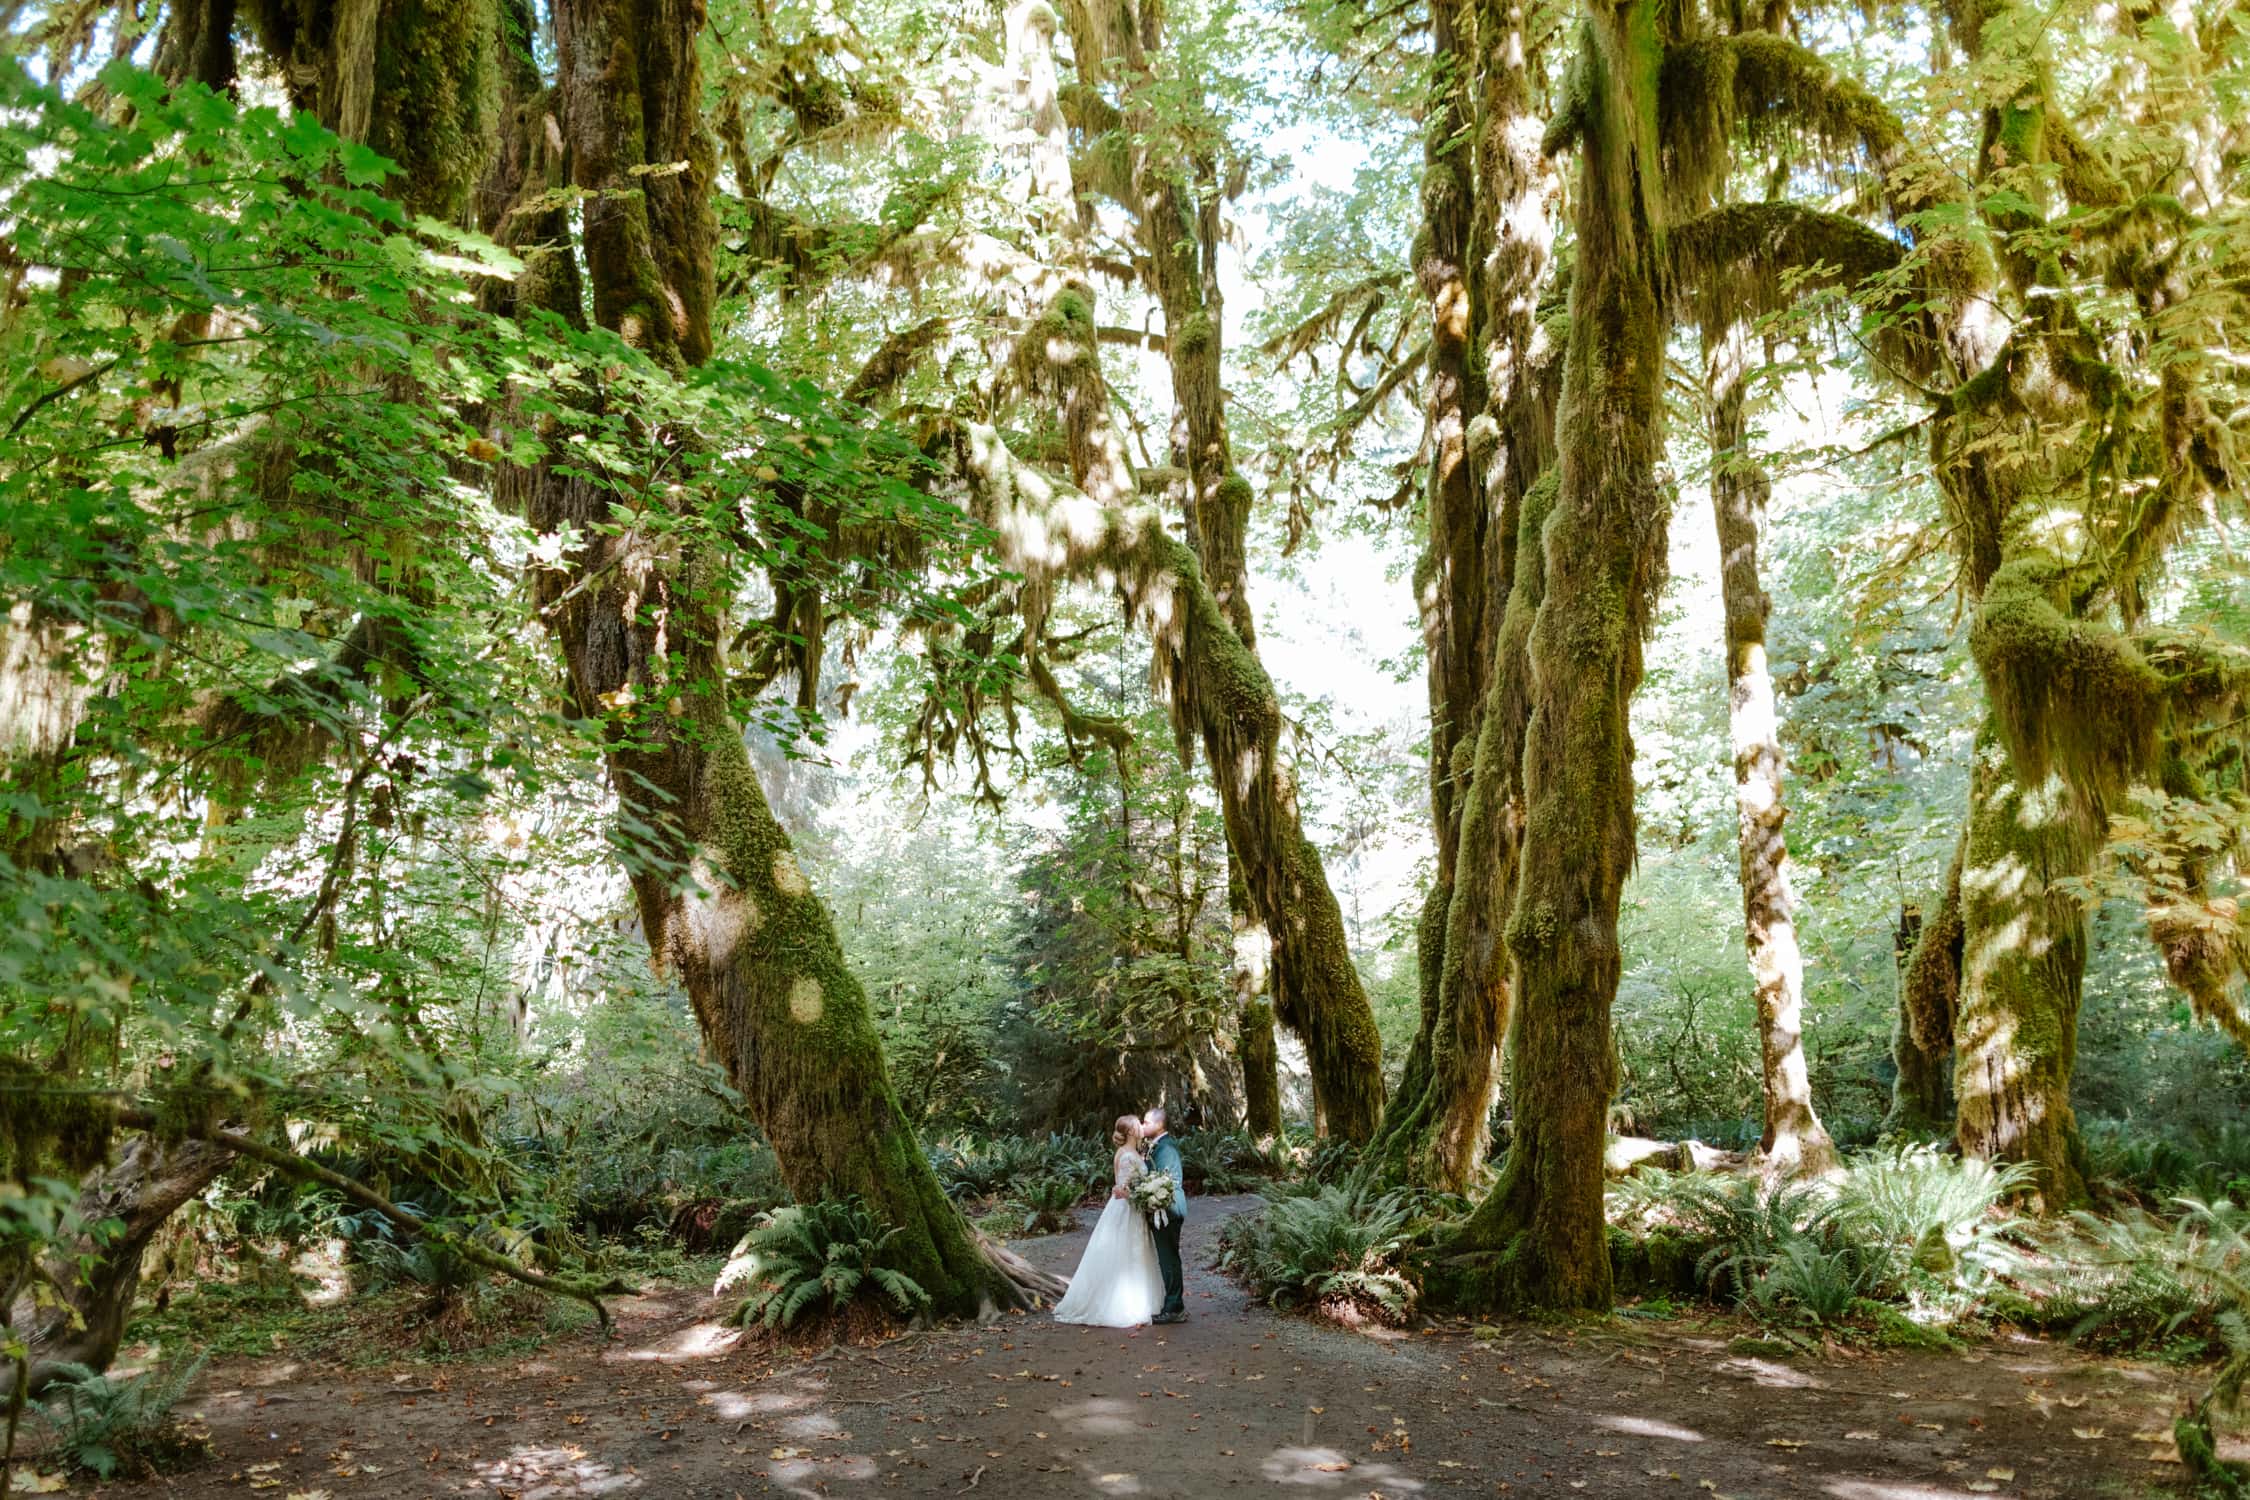 A bride and groom kissing in the Hall of Mosses in the Hoh Rainforest.